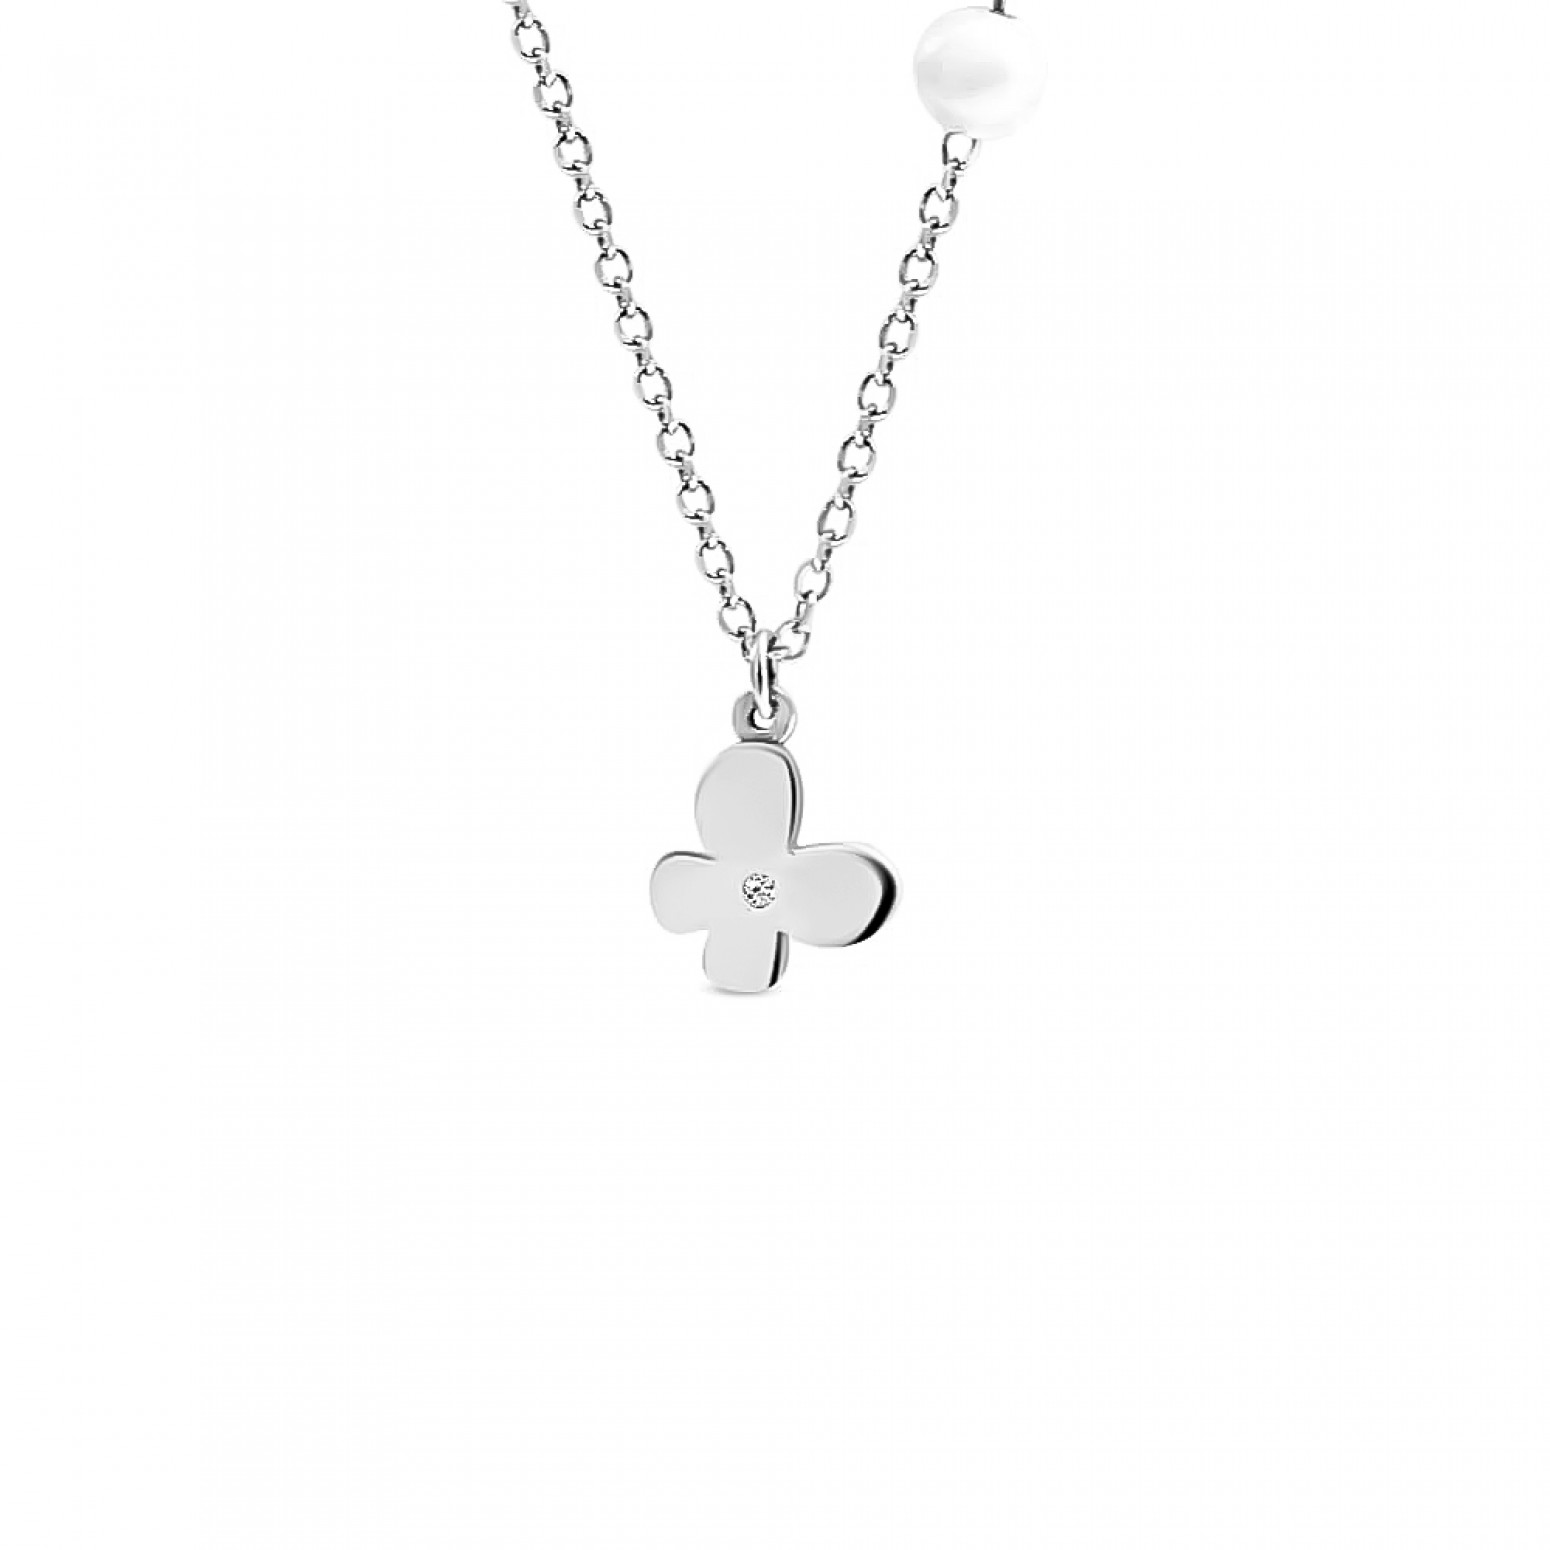 Butterfly necklace, Κ14 white gold with zircon and pearl, ko5185 NECKLACES Κοσμηματα - chrilia.gr